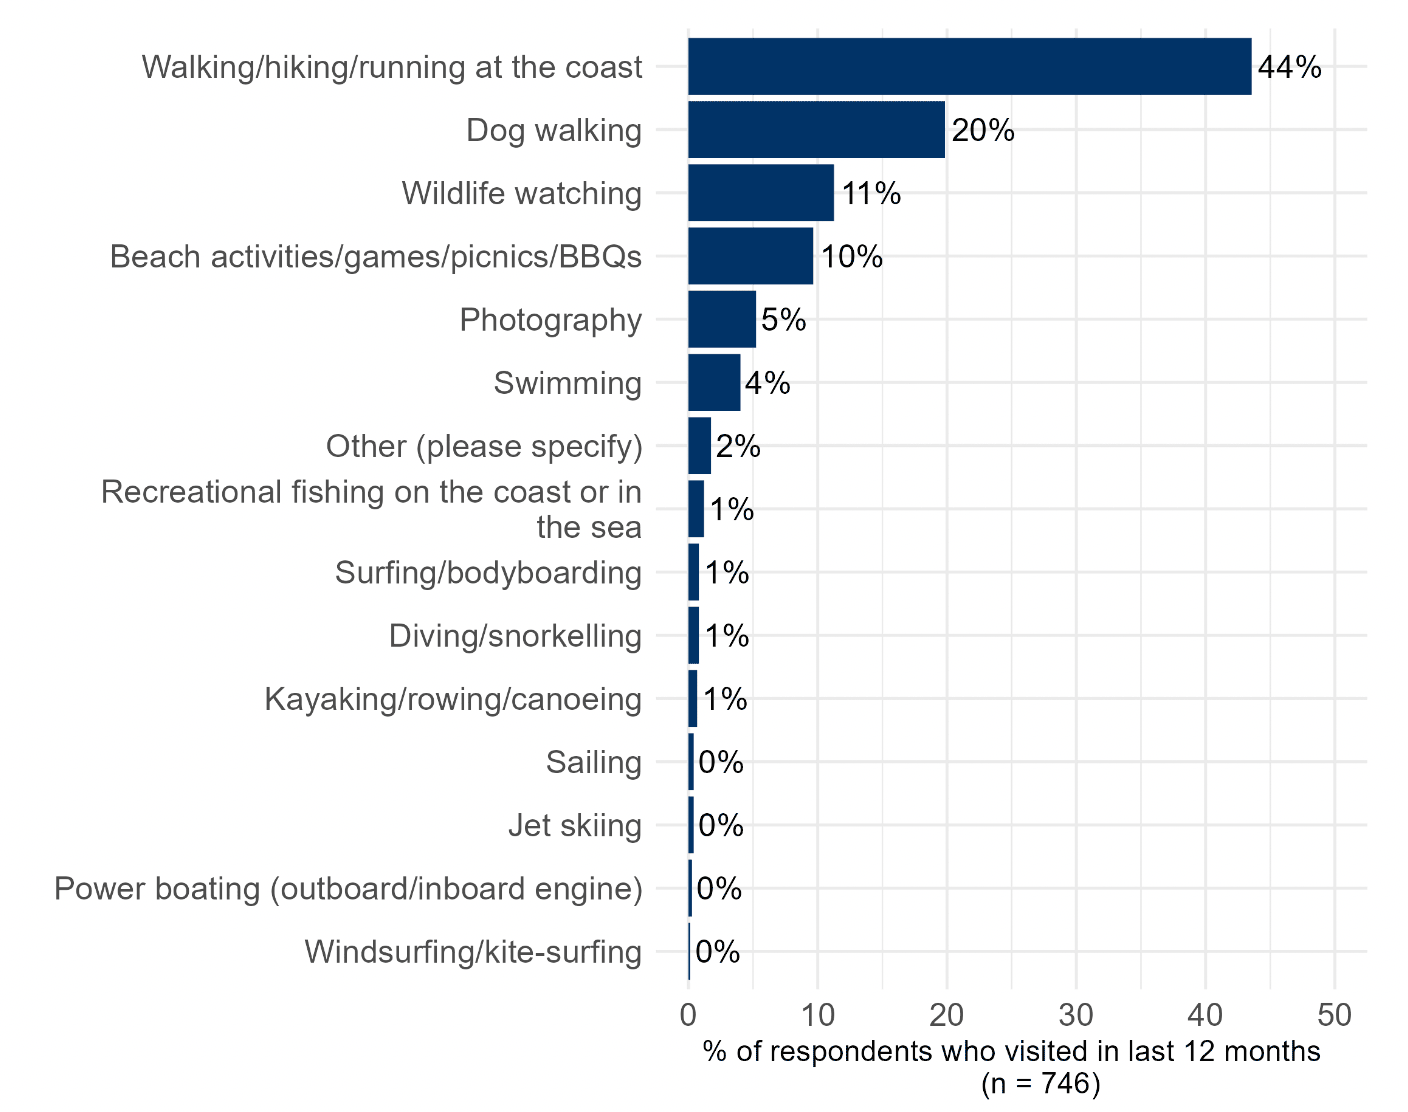 Bar chart showing respondent's most important leisure activities, with the top 3 consisting of 'walking/hiking/running at the coast' (44%), 'dog walking' (20%) and 'wildlife watching' (11%). 